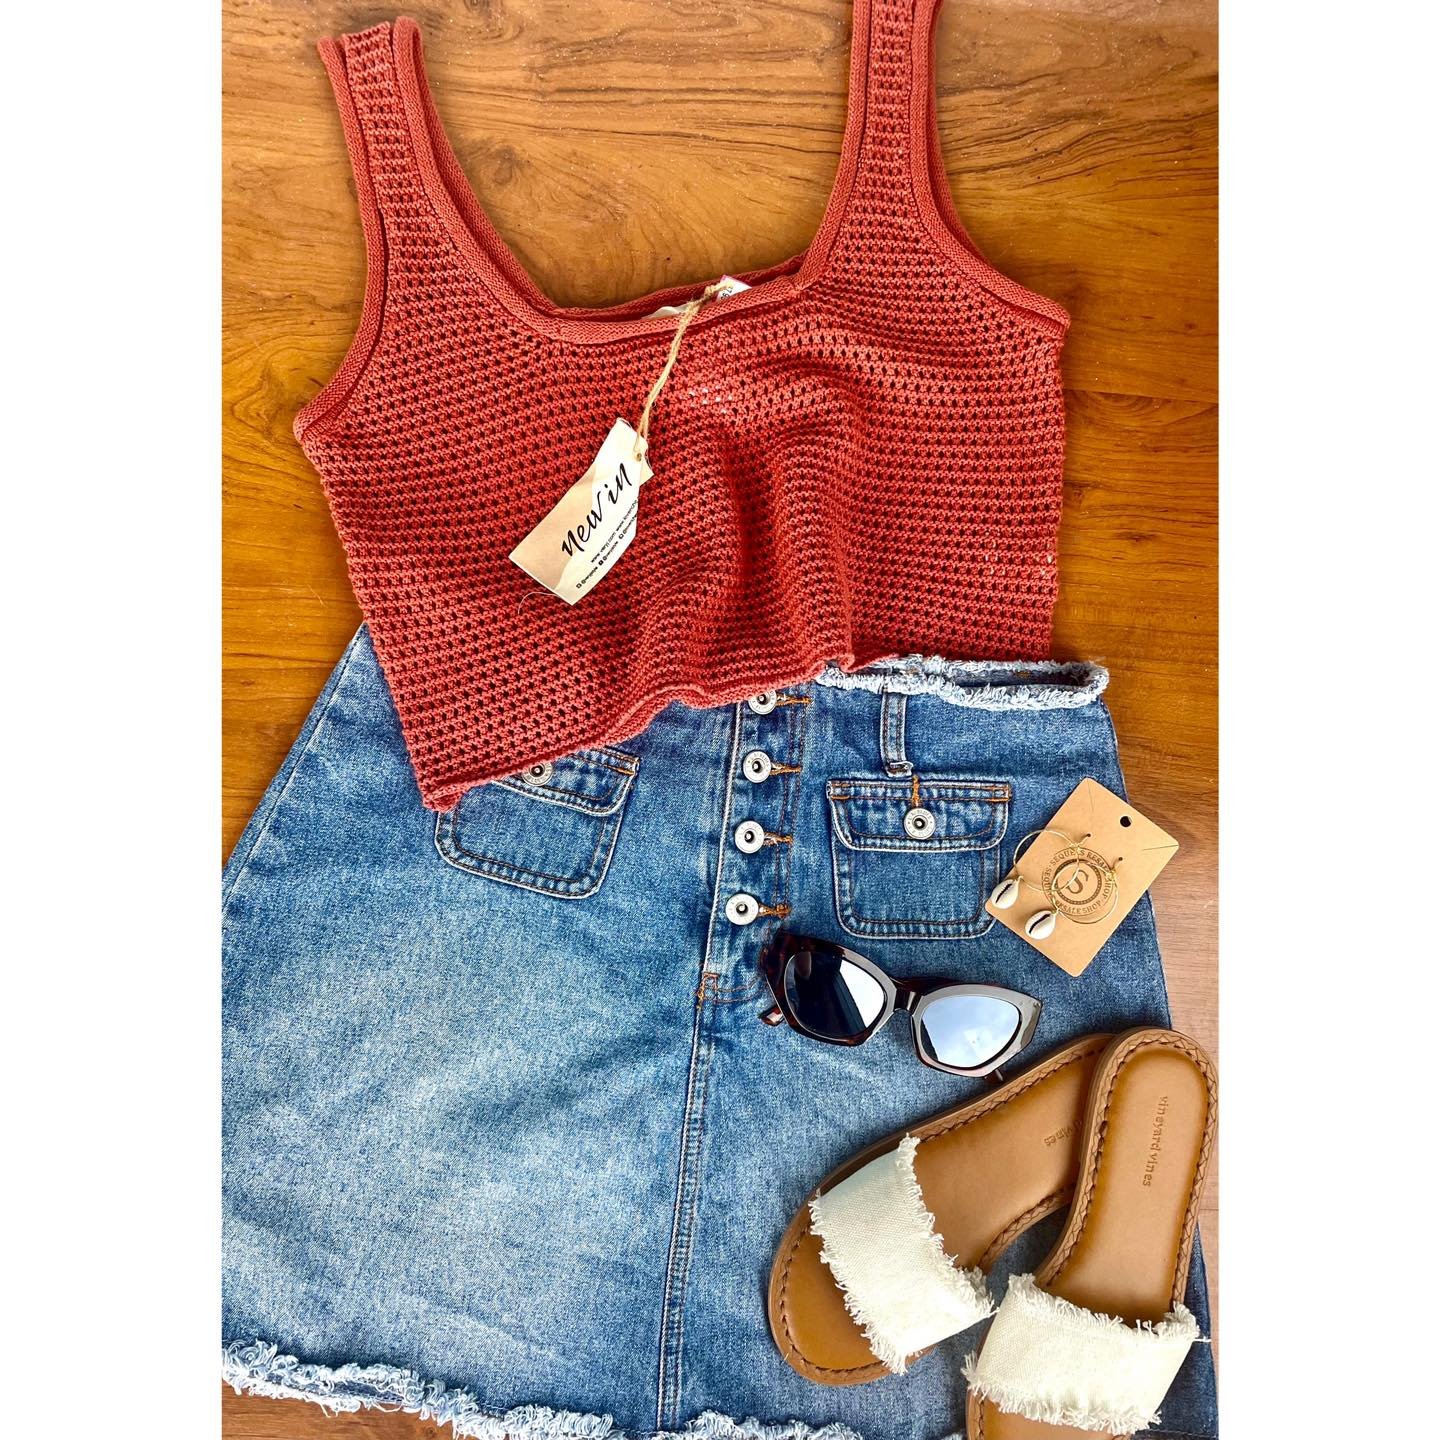 Happy Wednesday!☀️

Come shop for summer looks! We&rsquo;re open from 10-6!
&bull;
&bull;
&bull;
Tank: medium, $7.99
Skirt: 10, $7.49
Shoes: 6, $16.99